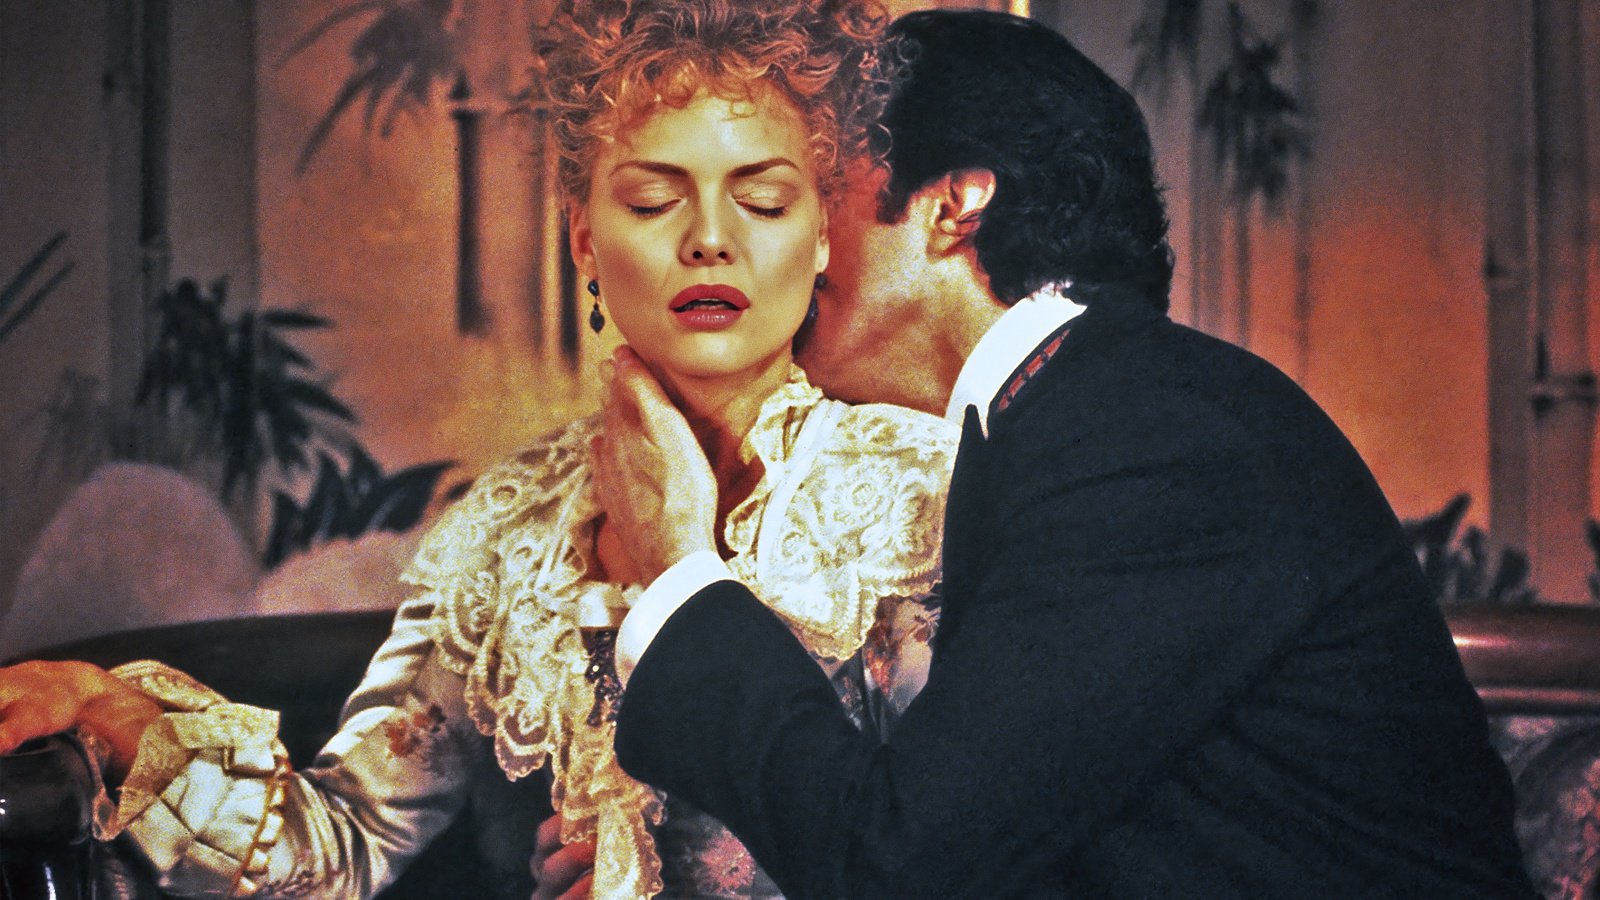 The age of innocence: passion according to Martin Scorsese